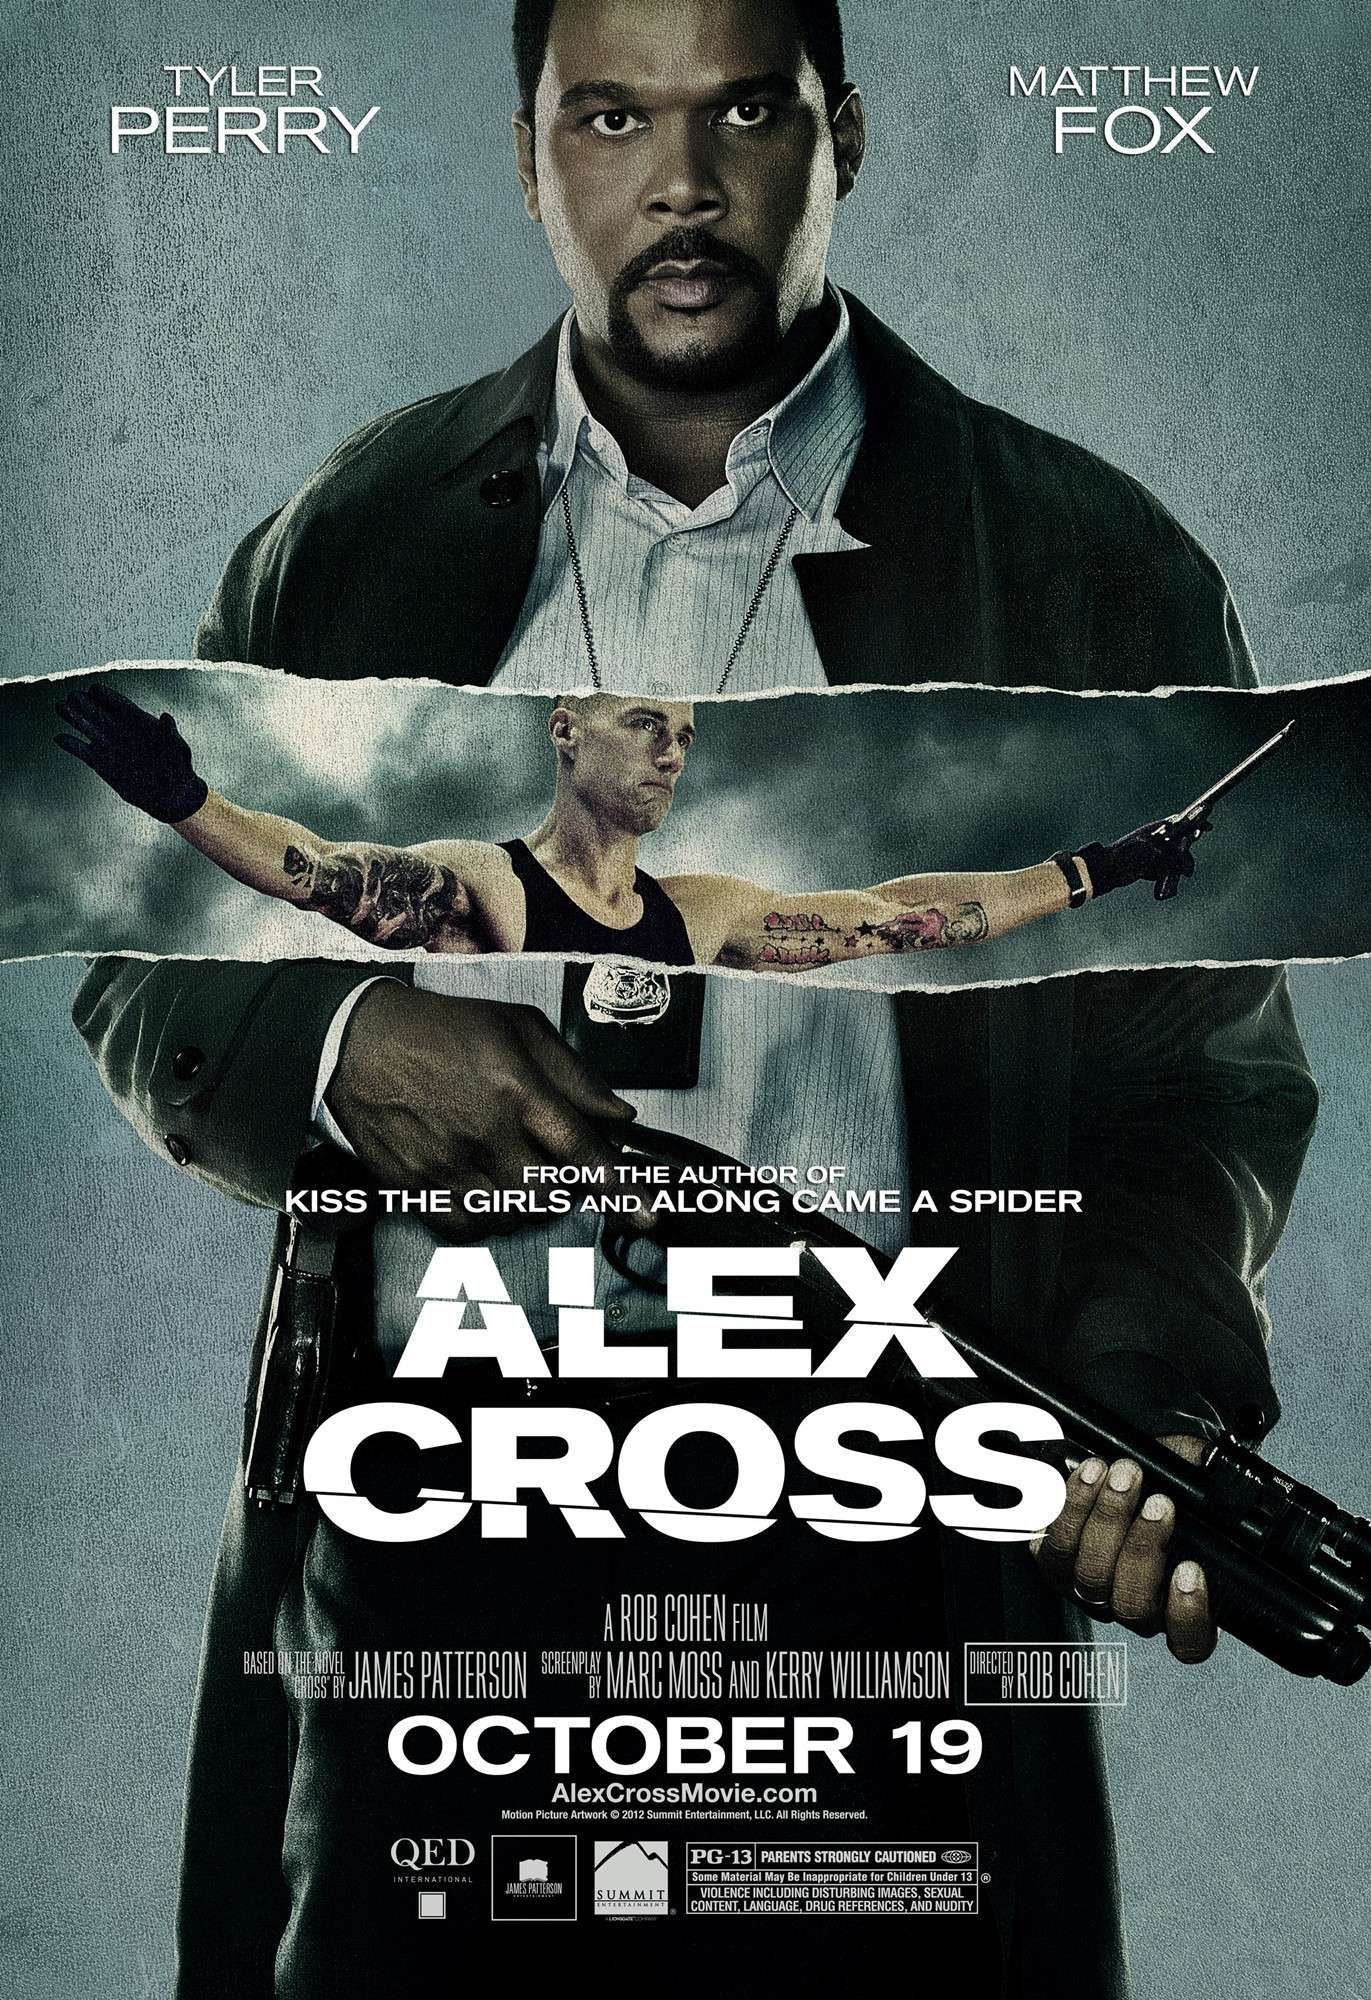 alex-cross-poster | Blallywood - Black movies, television, and Black